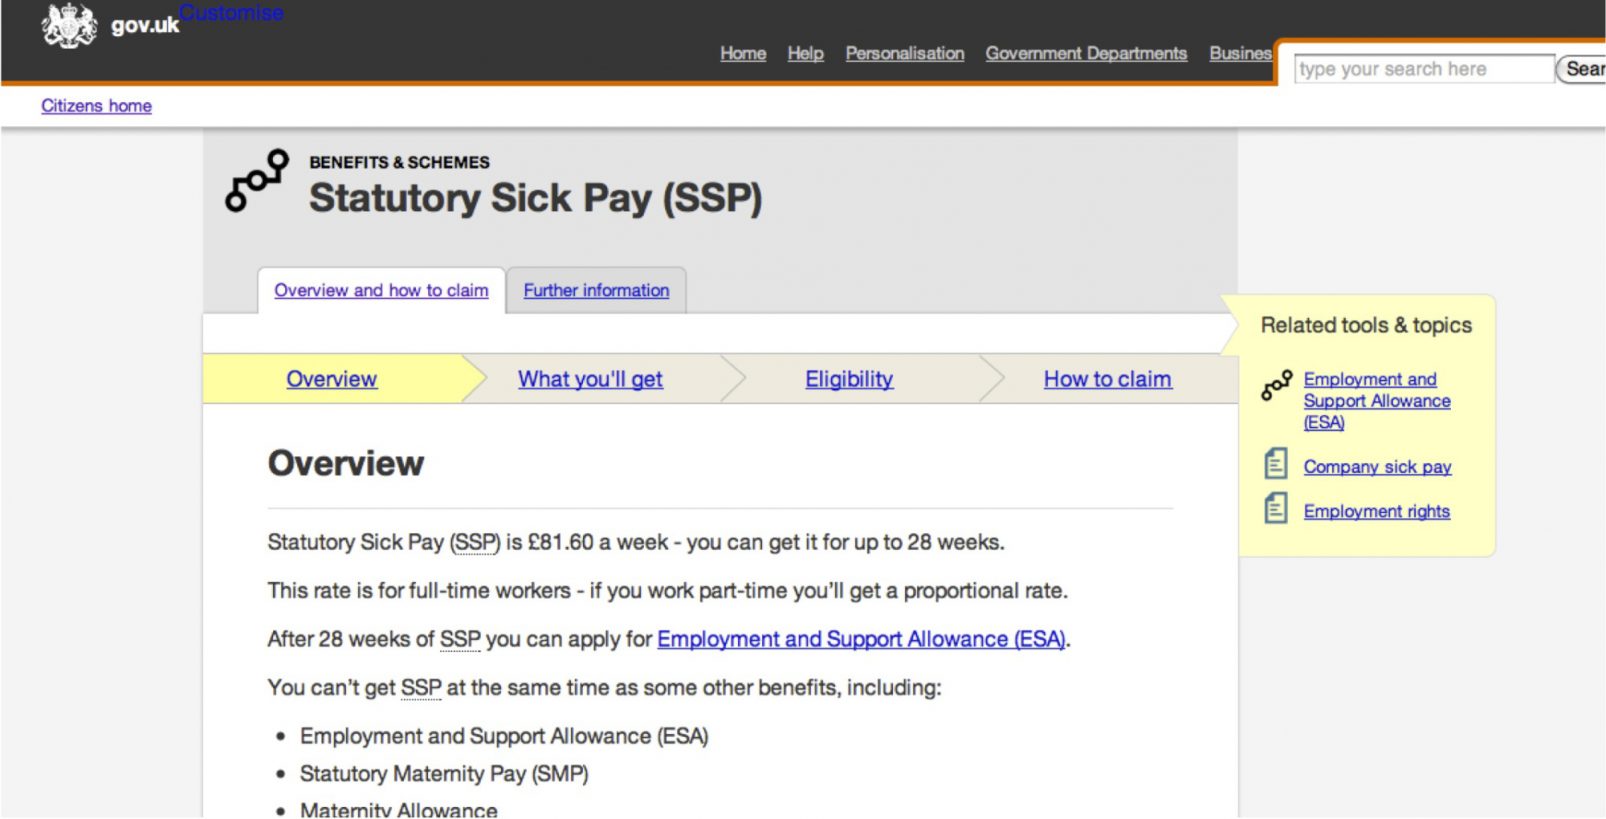 Another prototype page for the GOV.UK beta, this shows the page for Statutory Sick Pay (SSP)